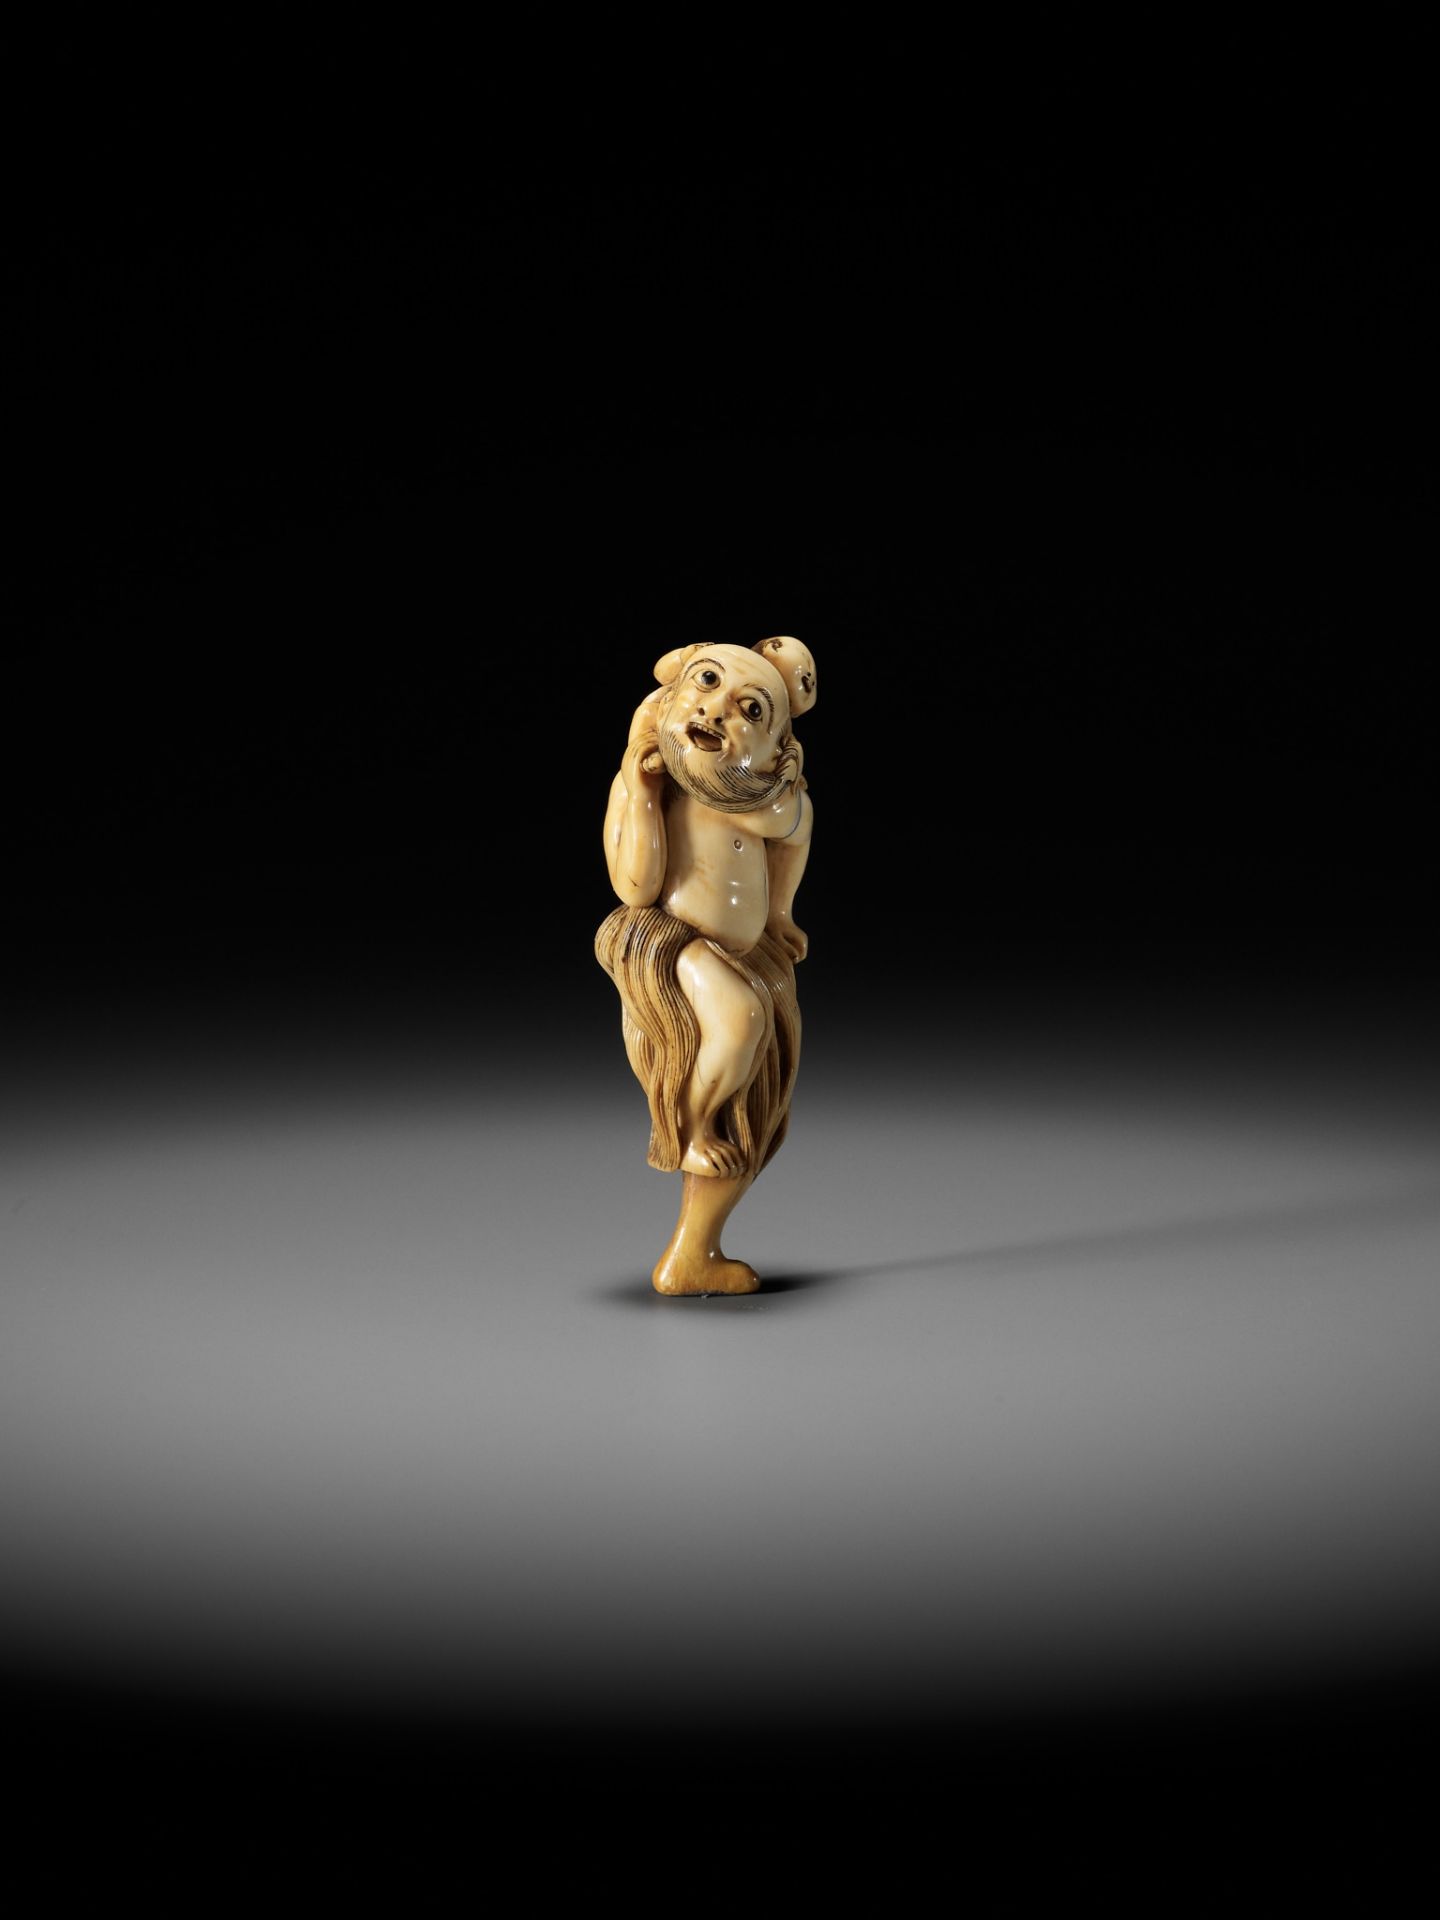 A SUPERB IVORY NETSUKE OF A FISHERMAN CARRYING A BOY, ATTRIBUTED TO GECHU - Image 8 of 12